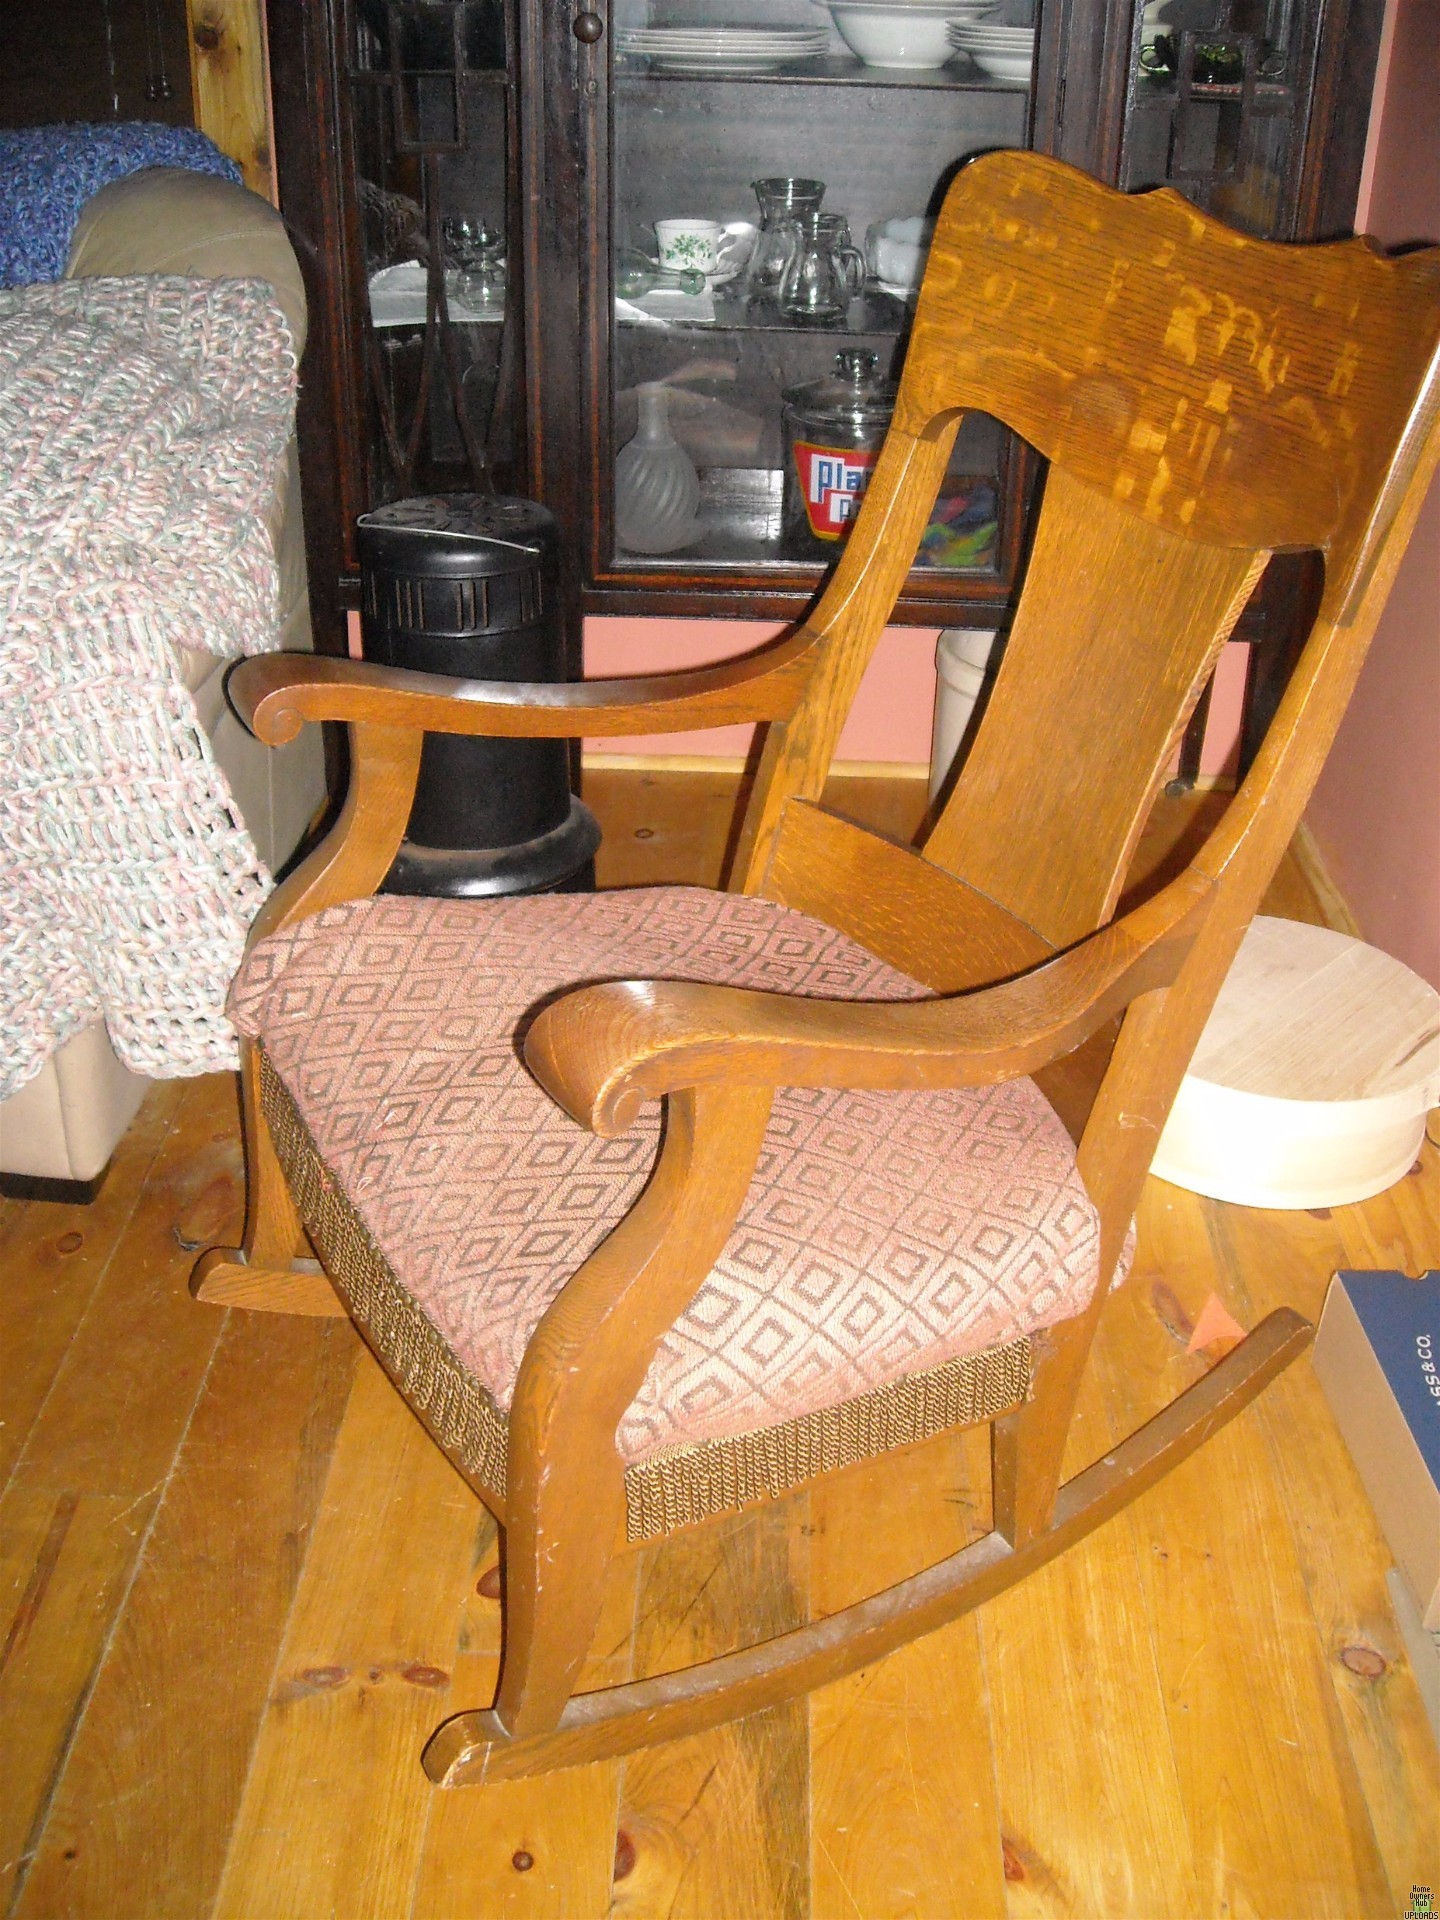 Image for Rocking chair rocks back too far